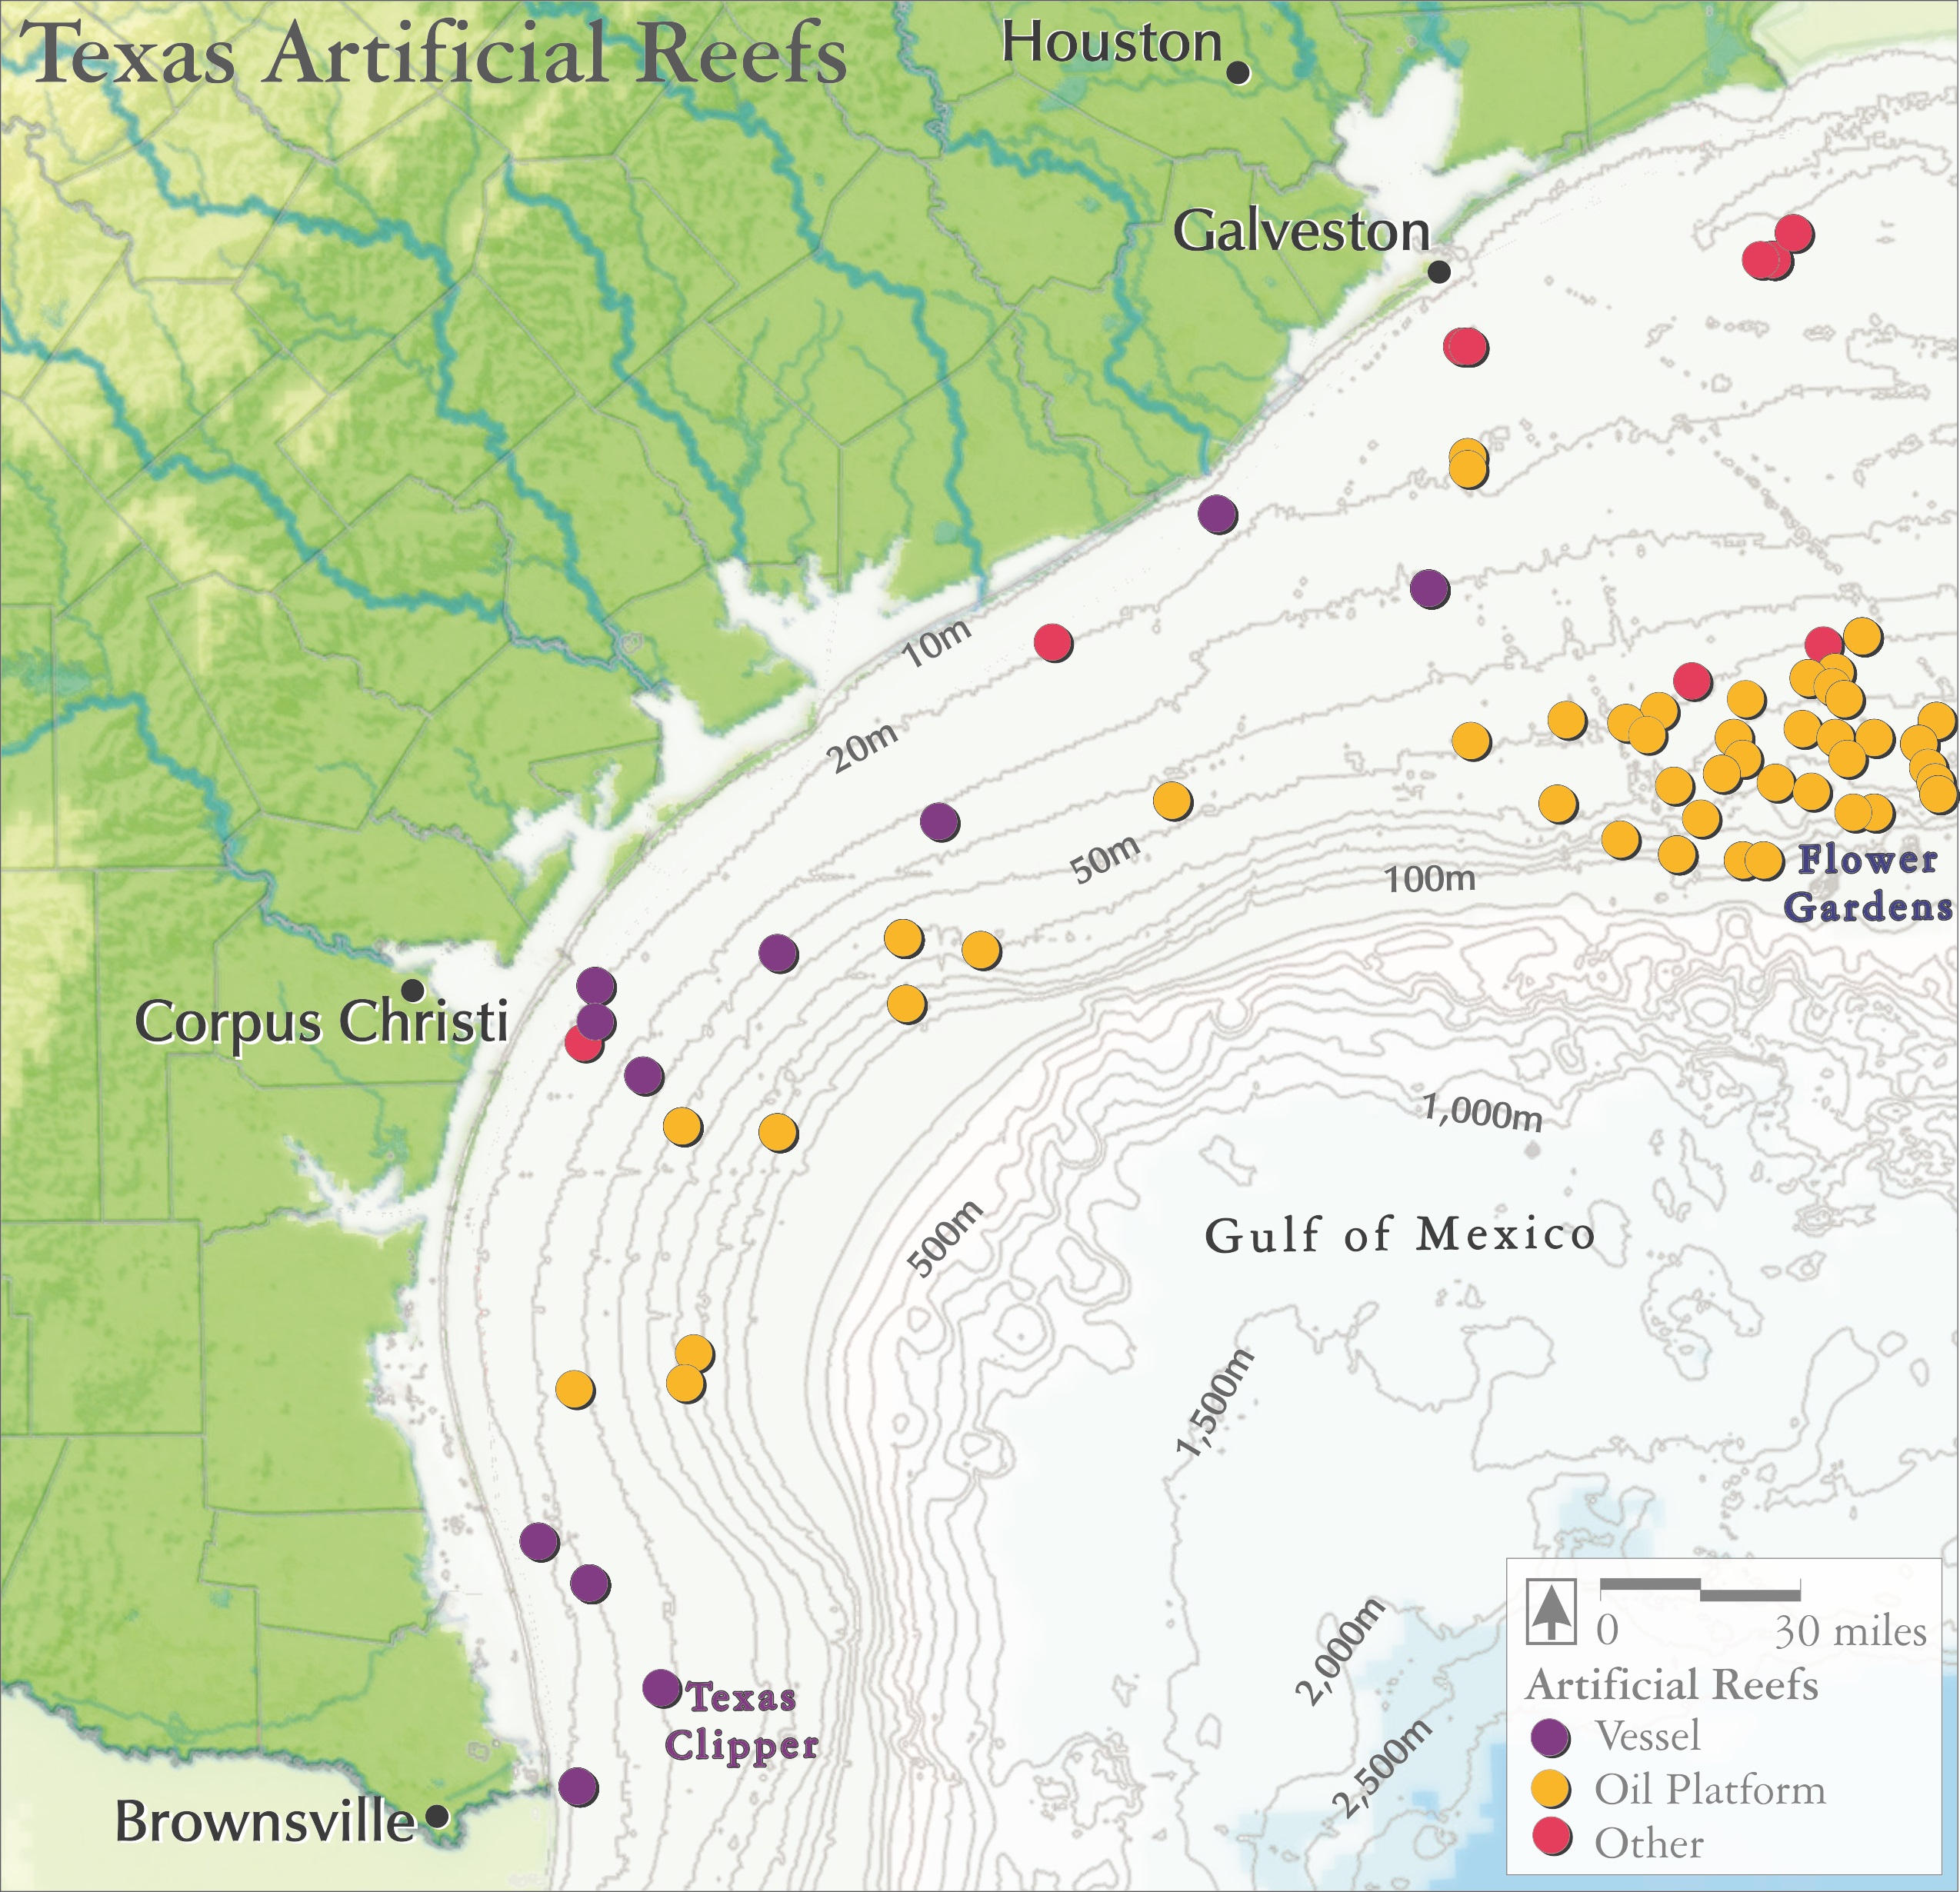 Texas Landscape Project: Map of Artificial Reefs